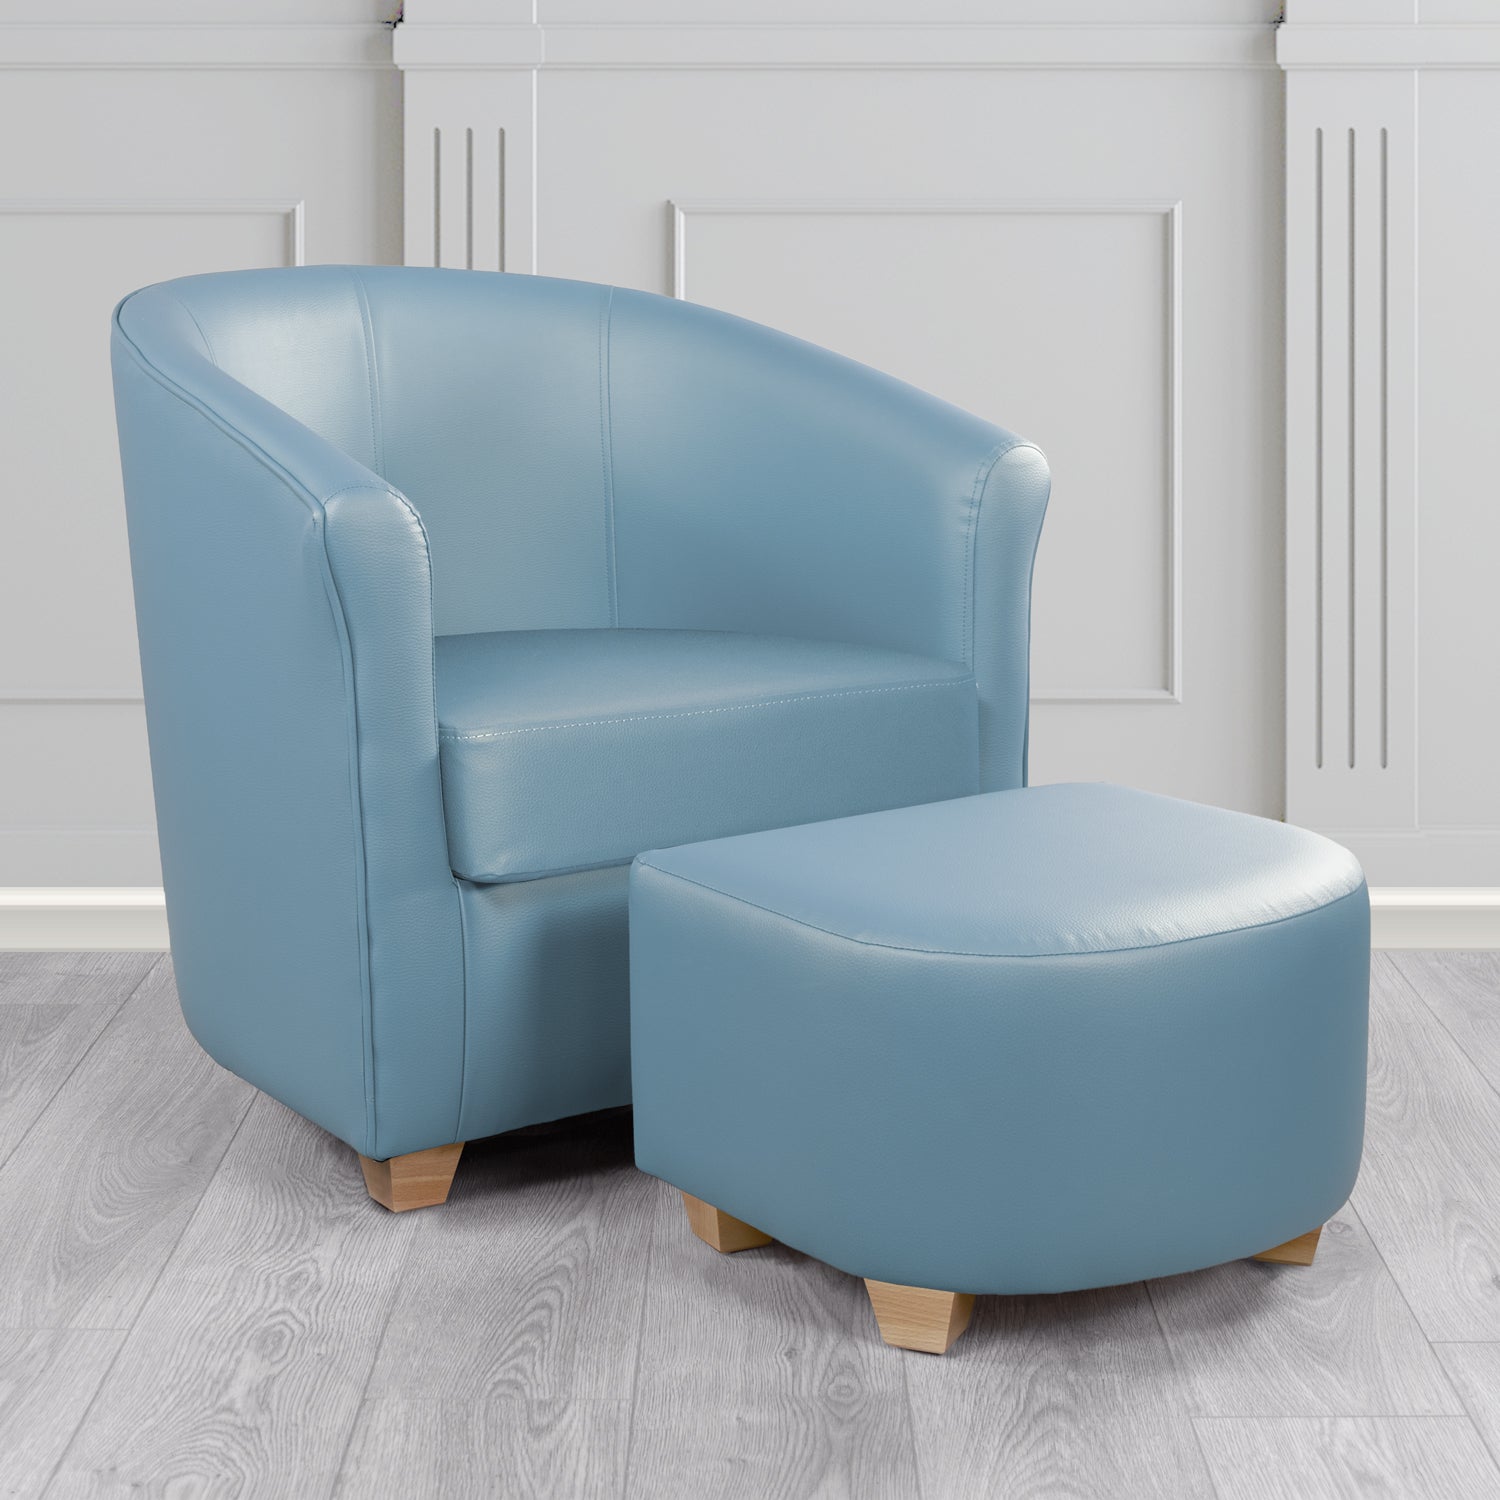 Cannes Tub Chair with Footstool Set in Just Colour Cool Blue Crib 5 Faux Leather - The Tub Chair Shop